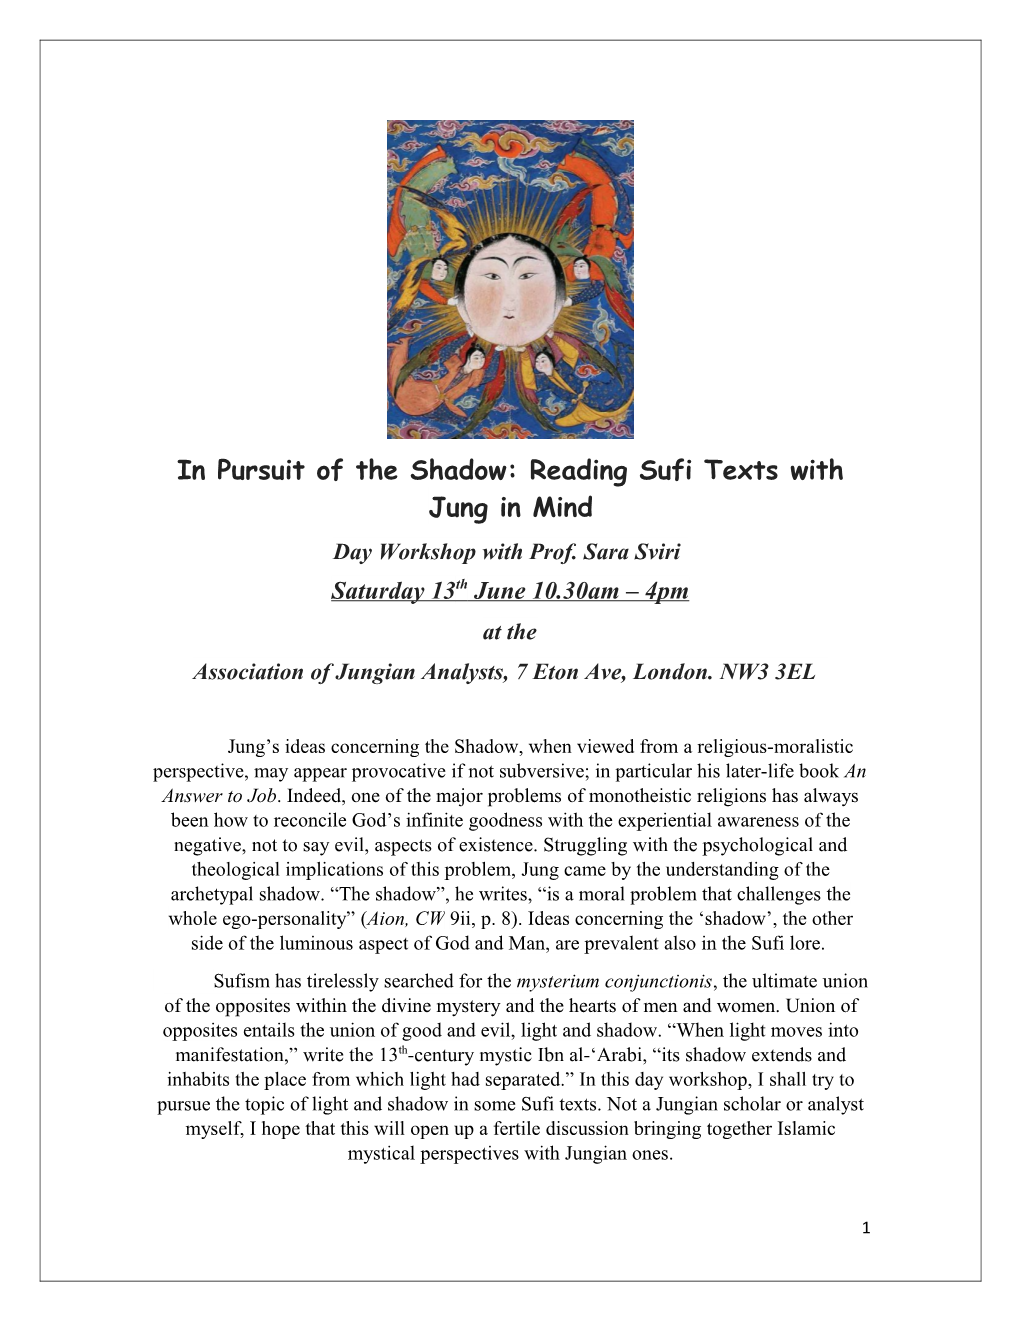 In Pursuit of the Shadow: Reading Sufi Texts with Jung in Mind